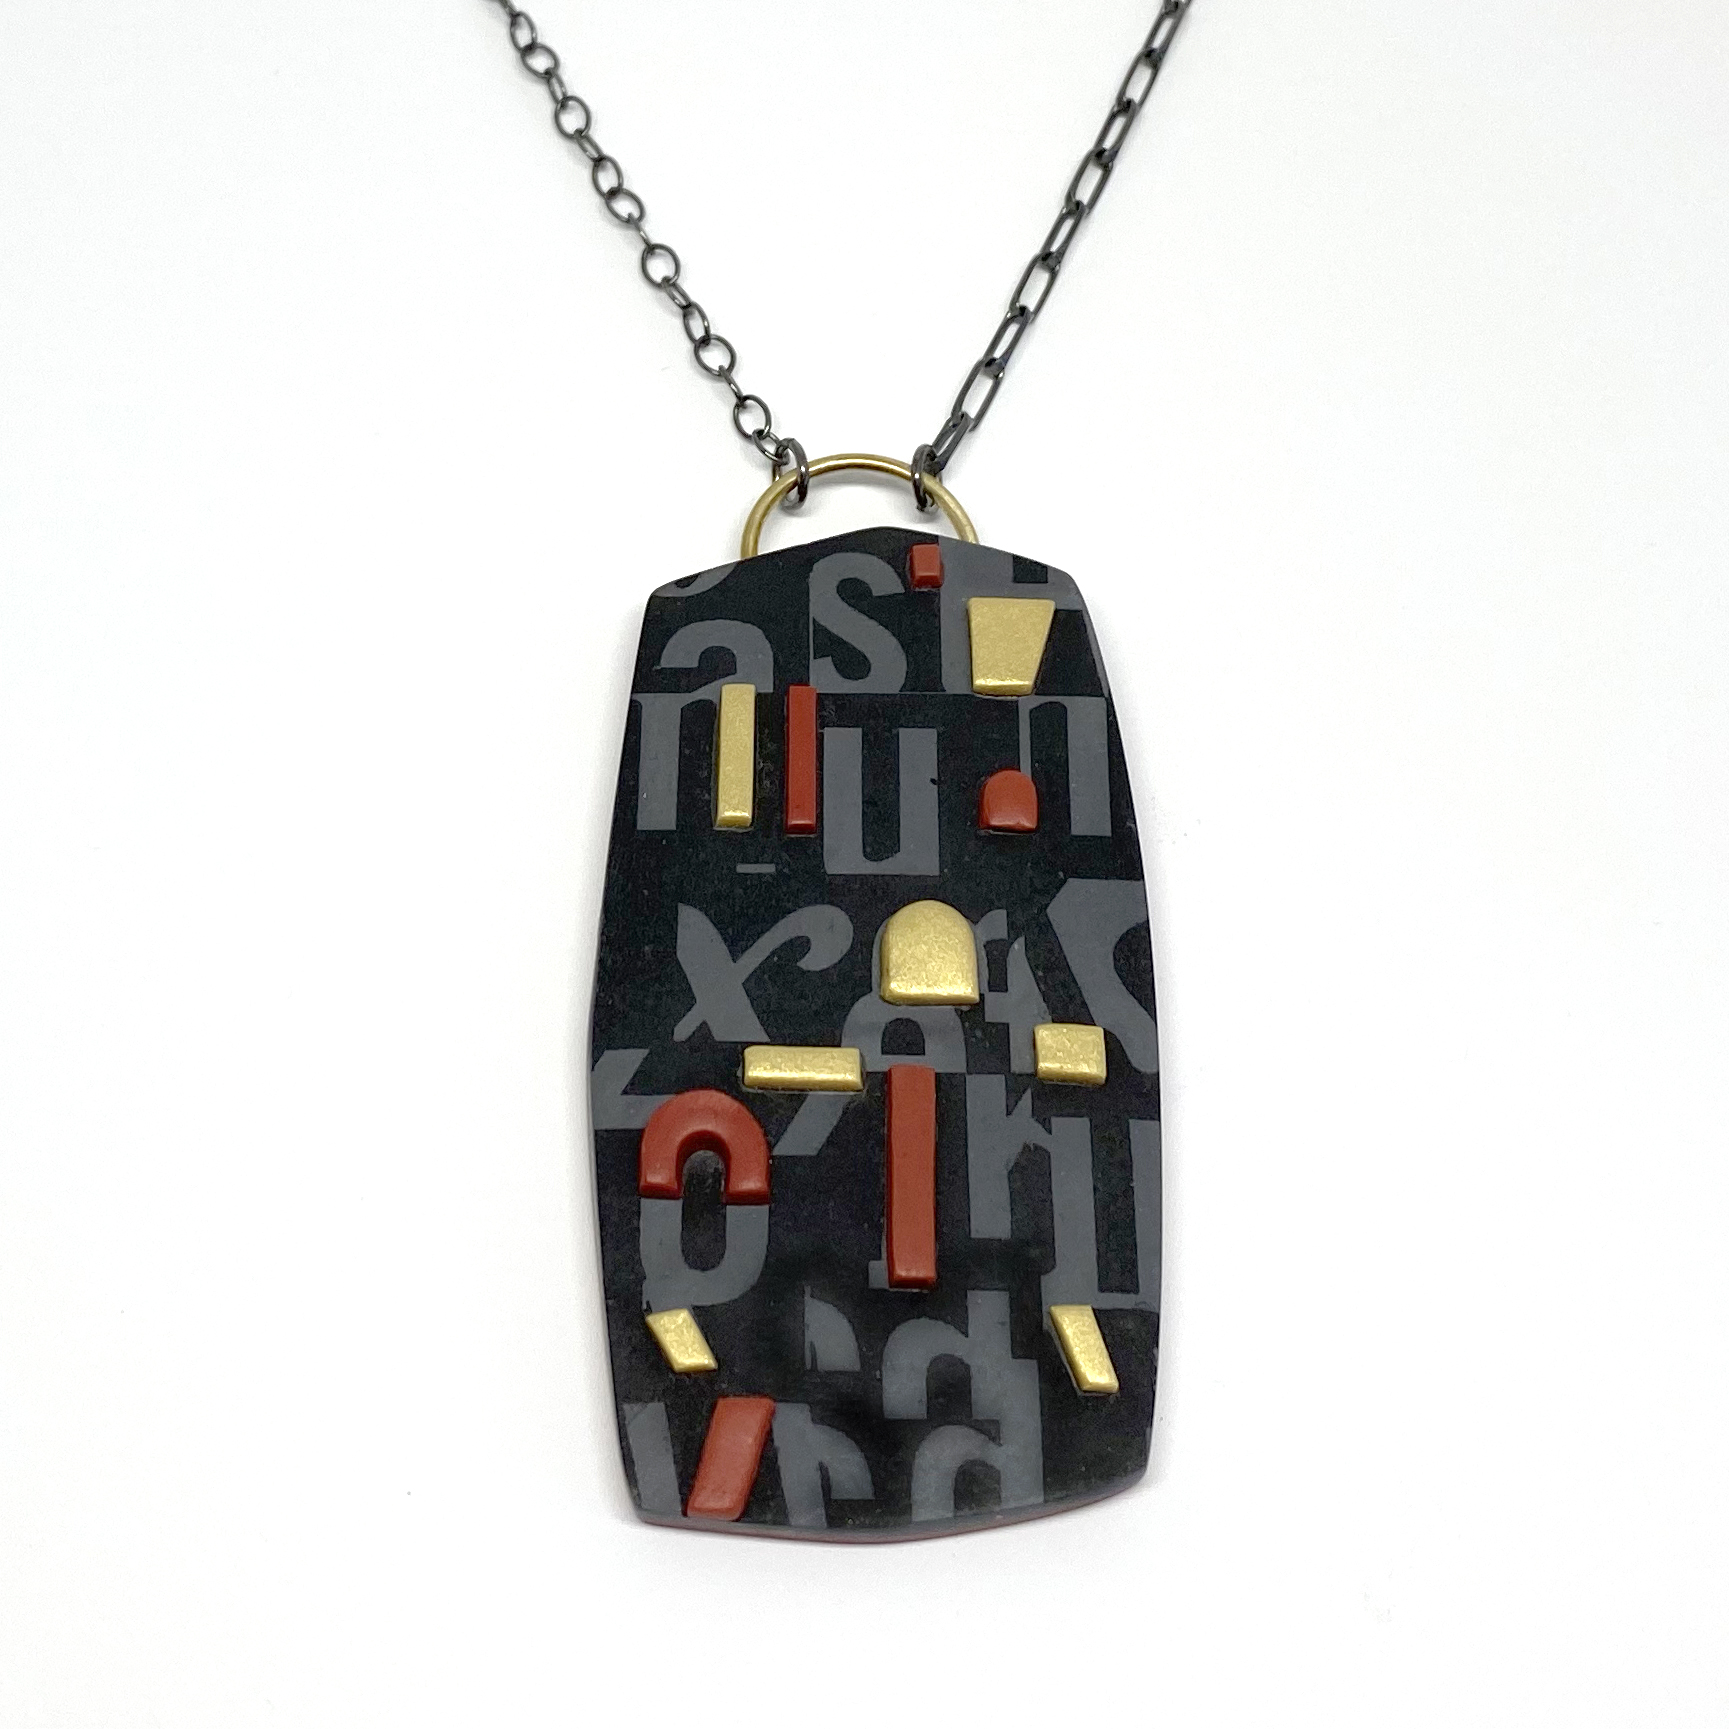 black pendent with gray letters painted on it. Maroon and gold shaped protrude out of the pendent.